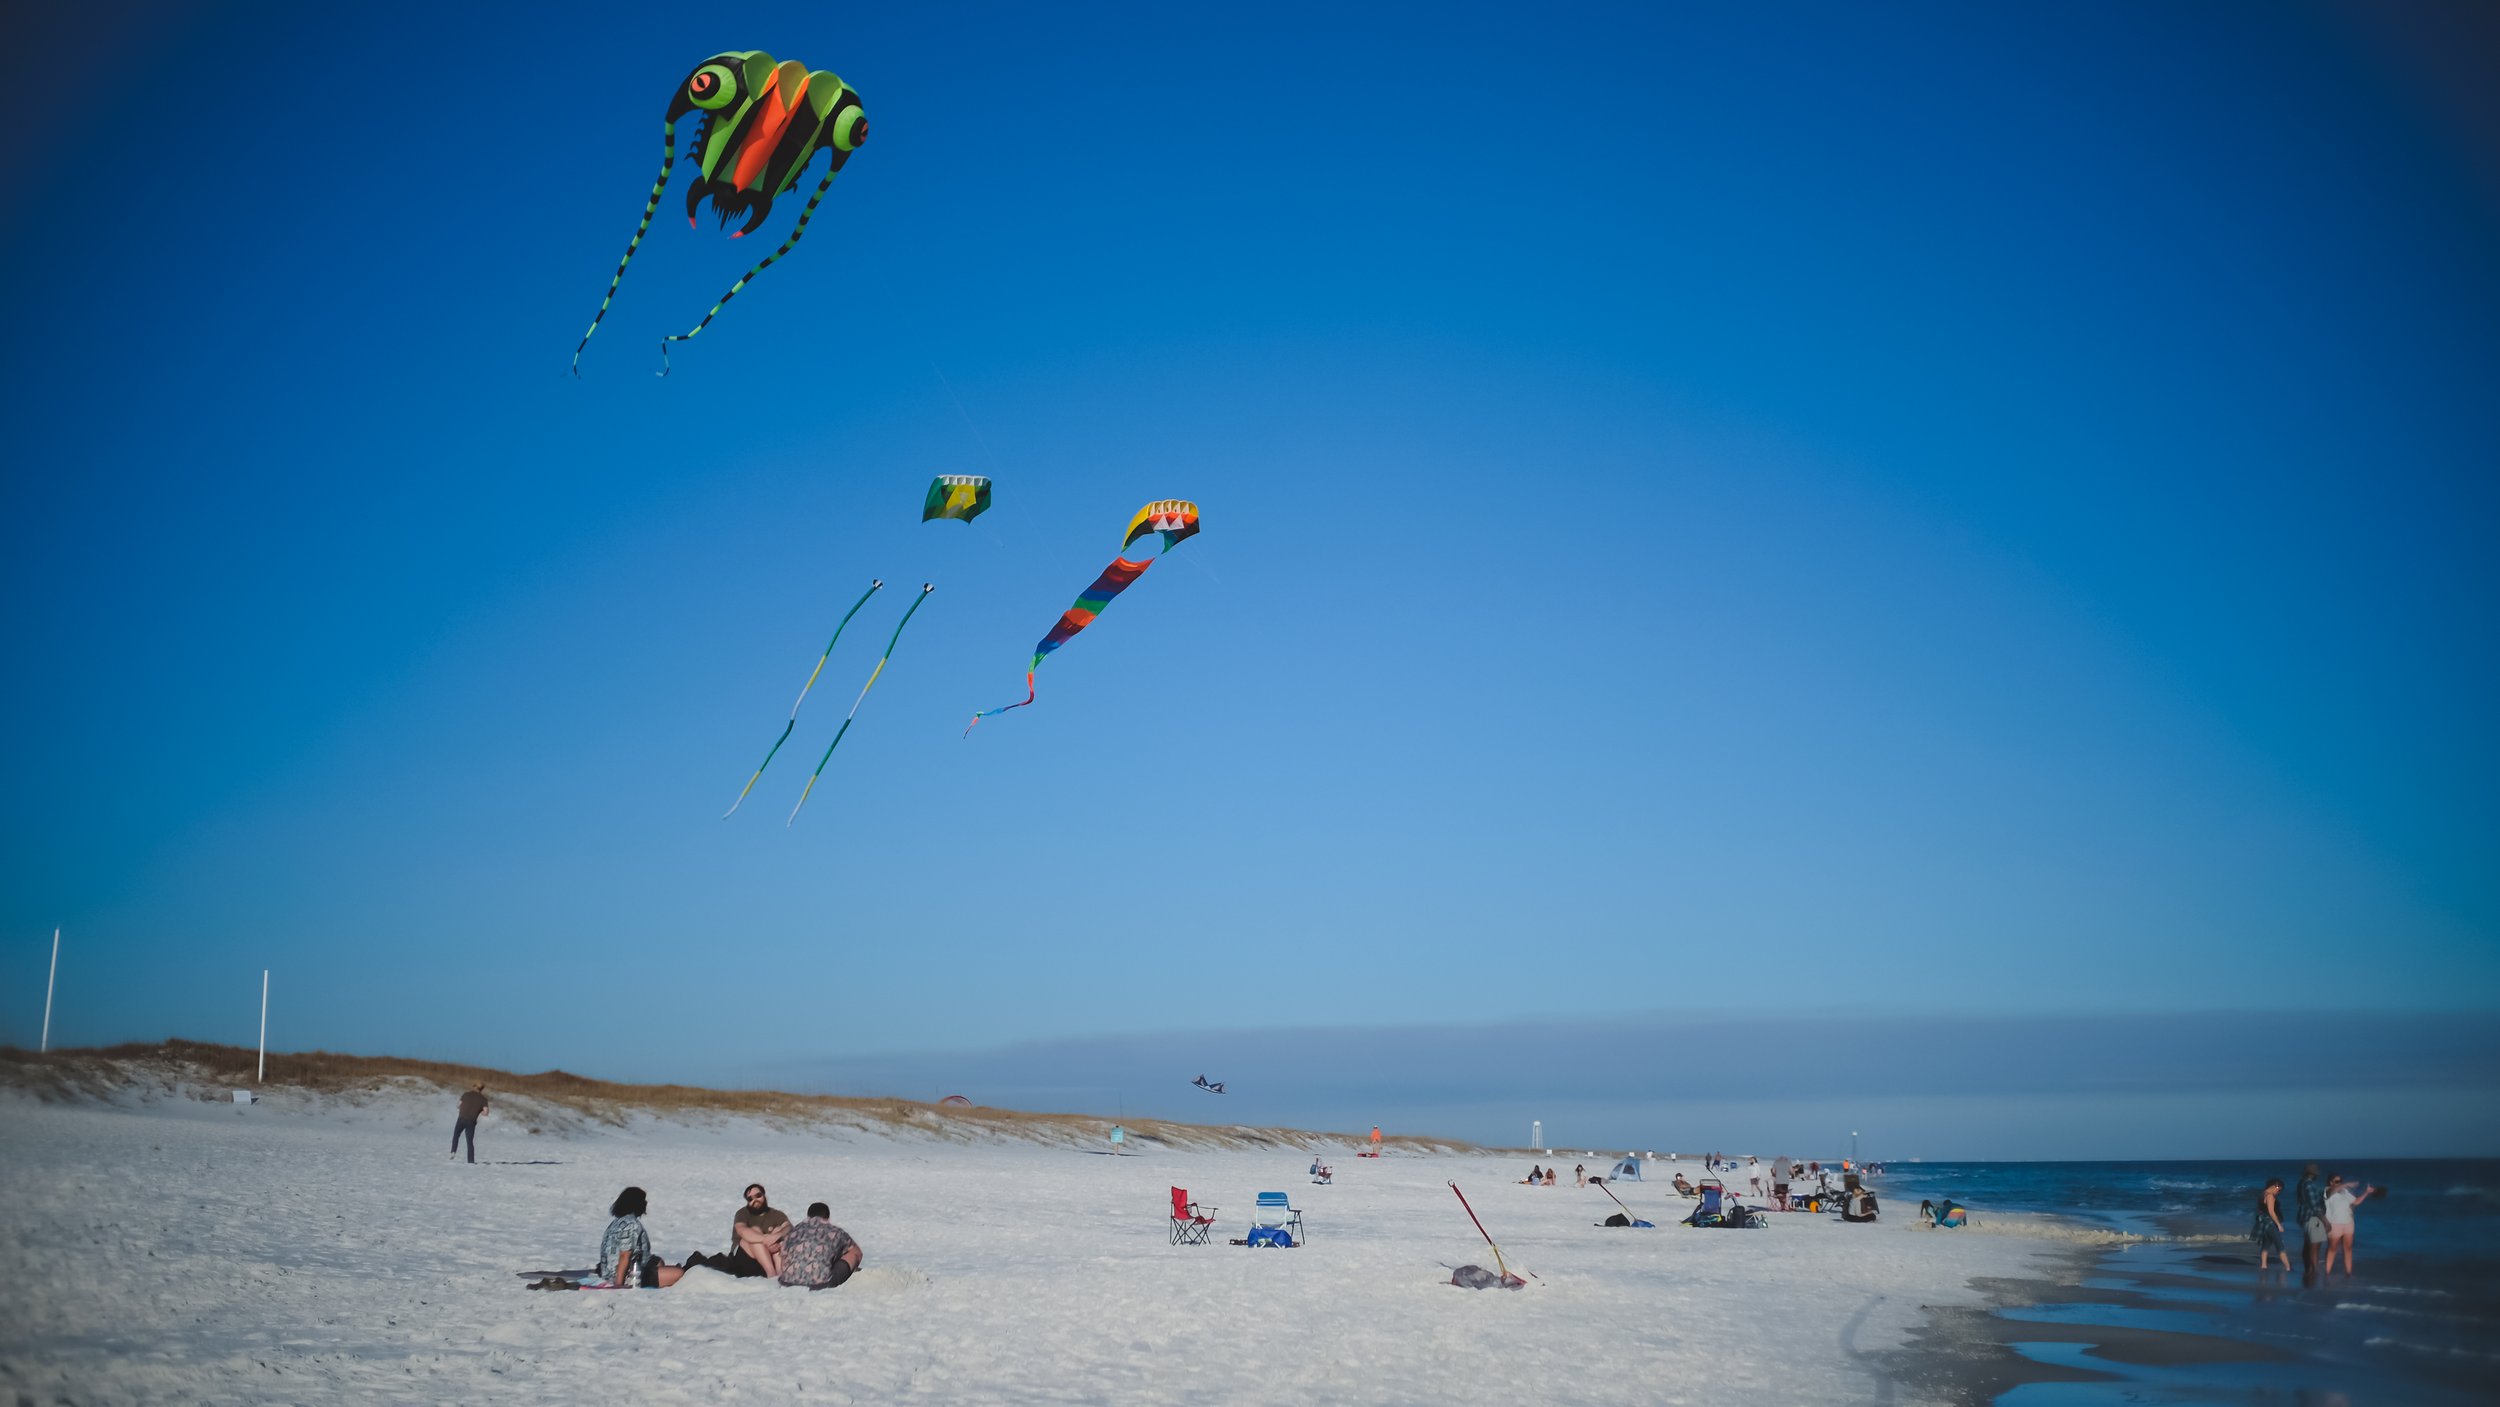 Colorful Kites over Beach